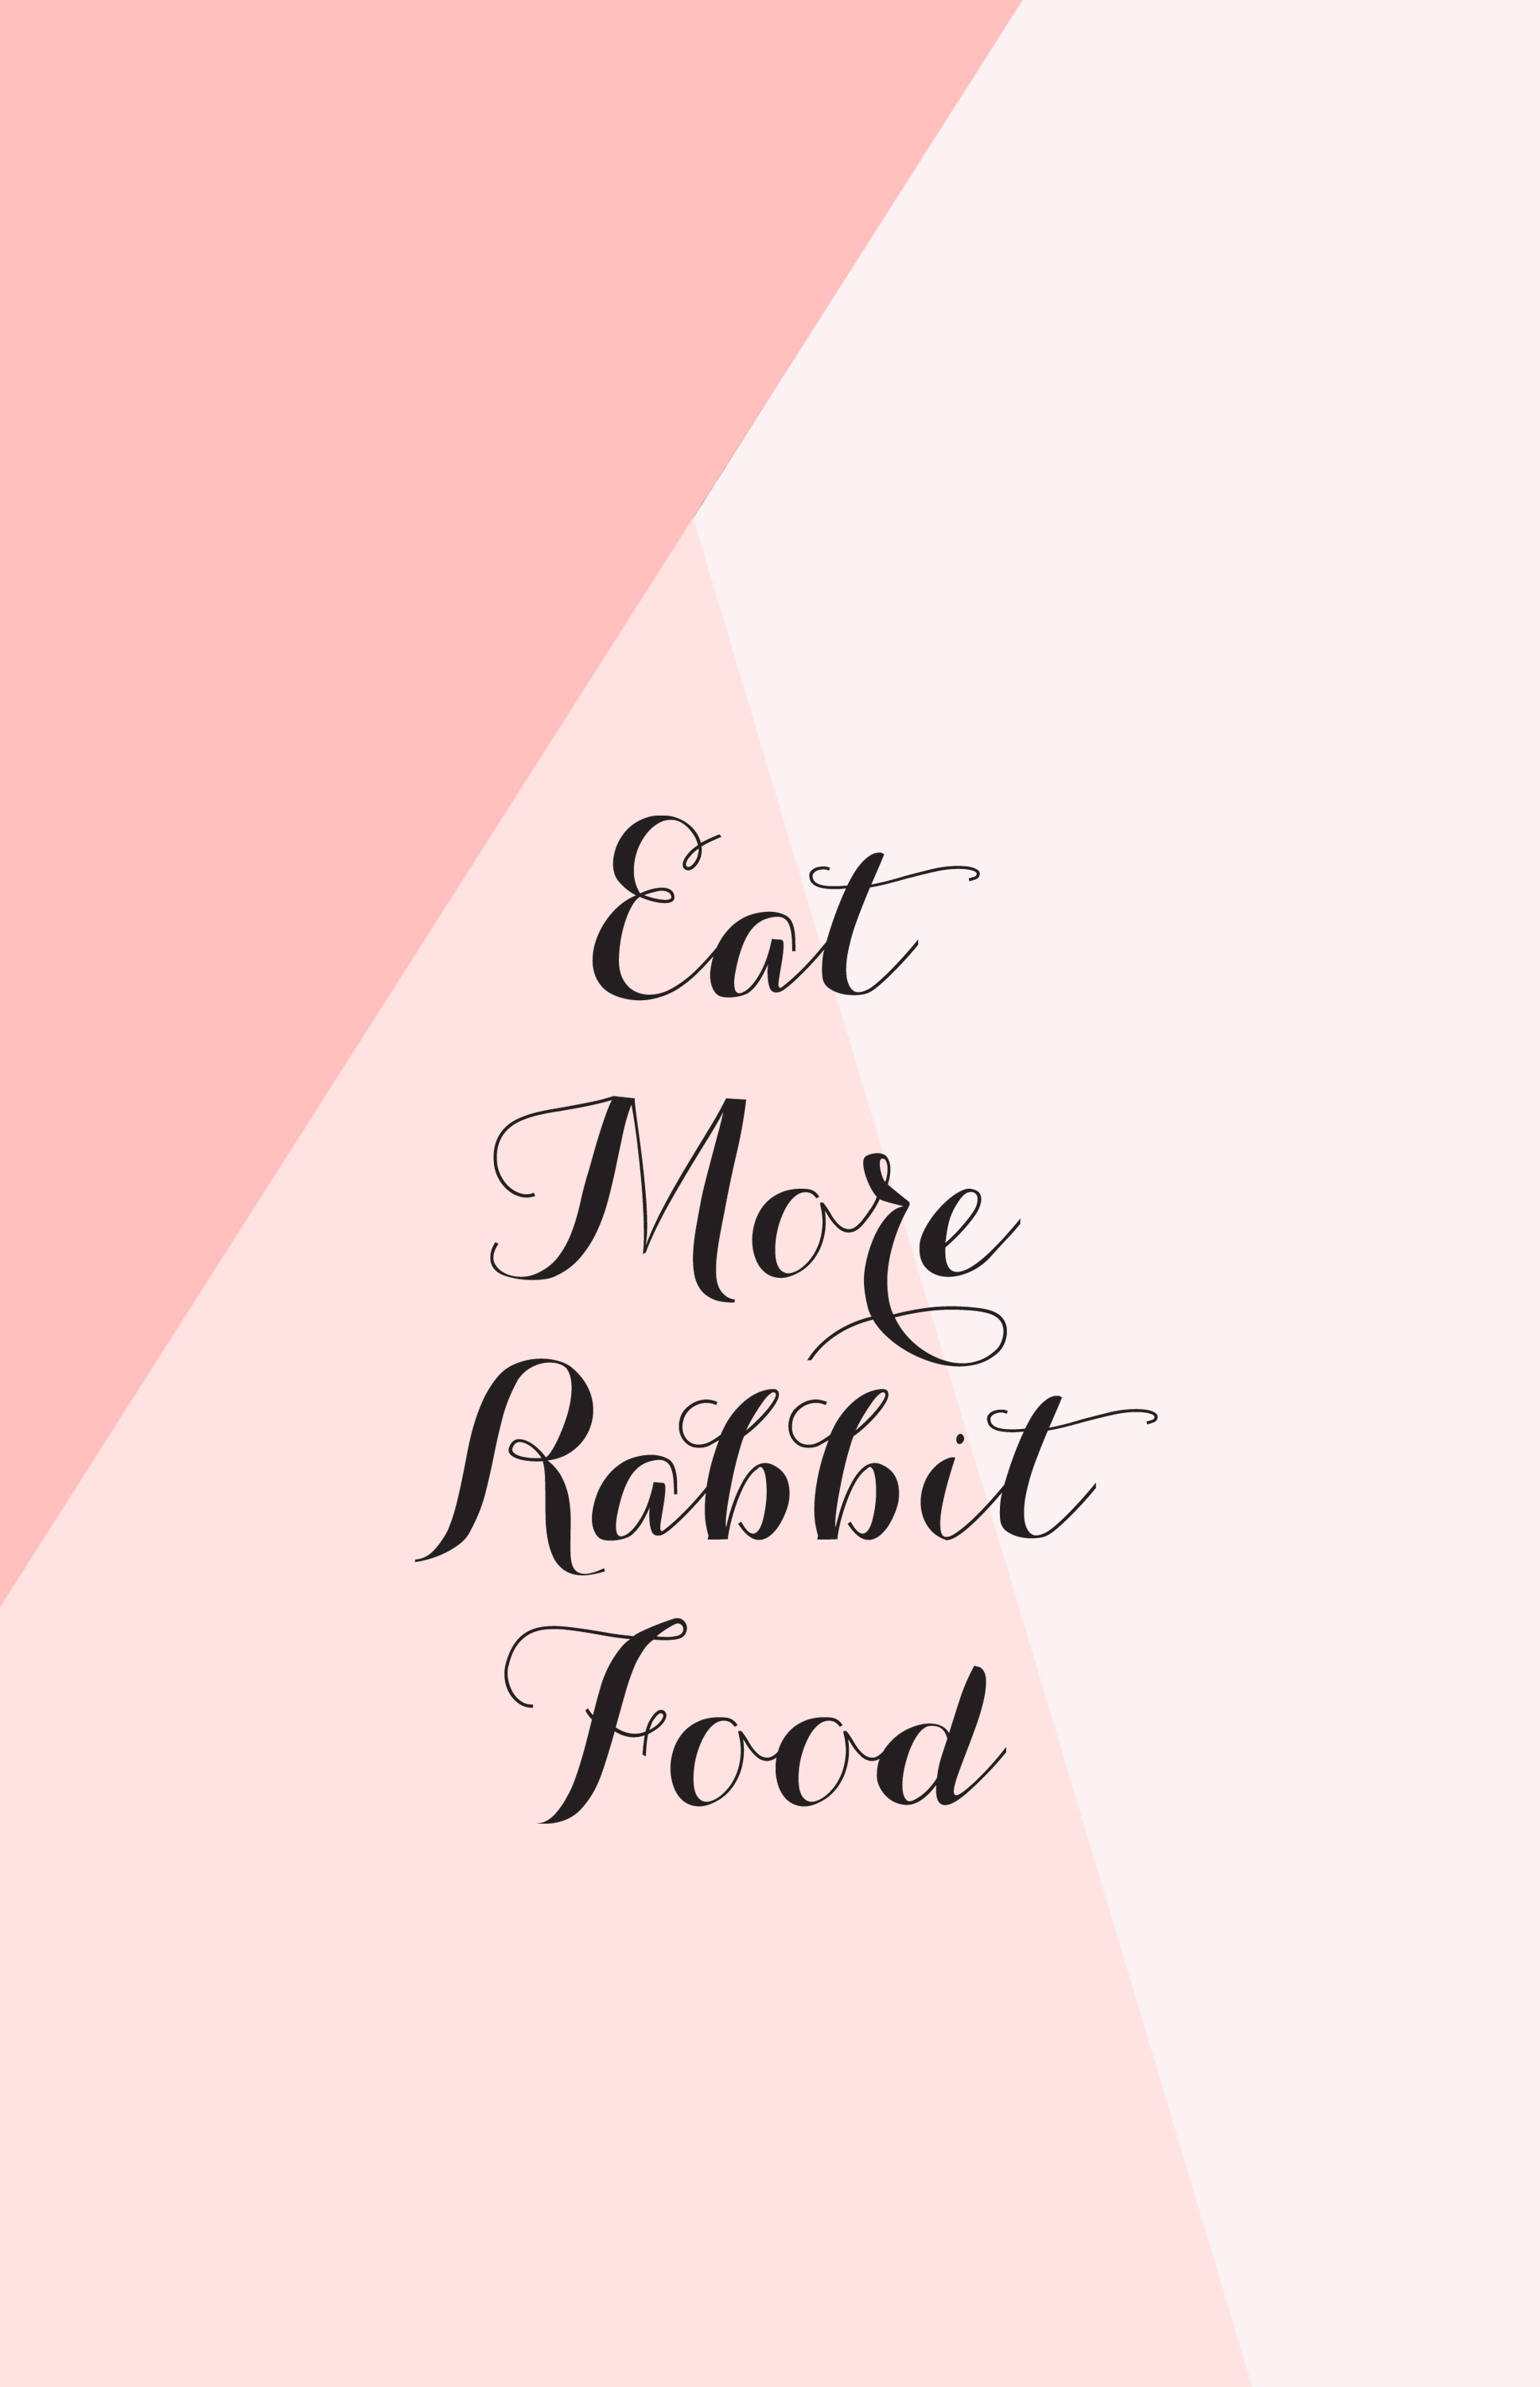 Wallpapers Downloads Archives   Rabbit Food For My Bunny Teeth